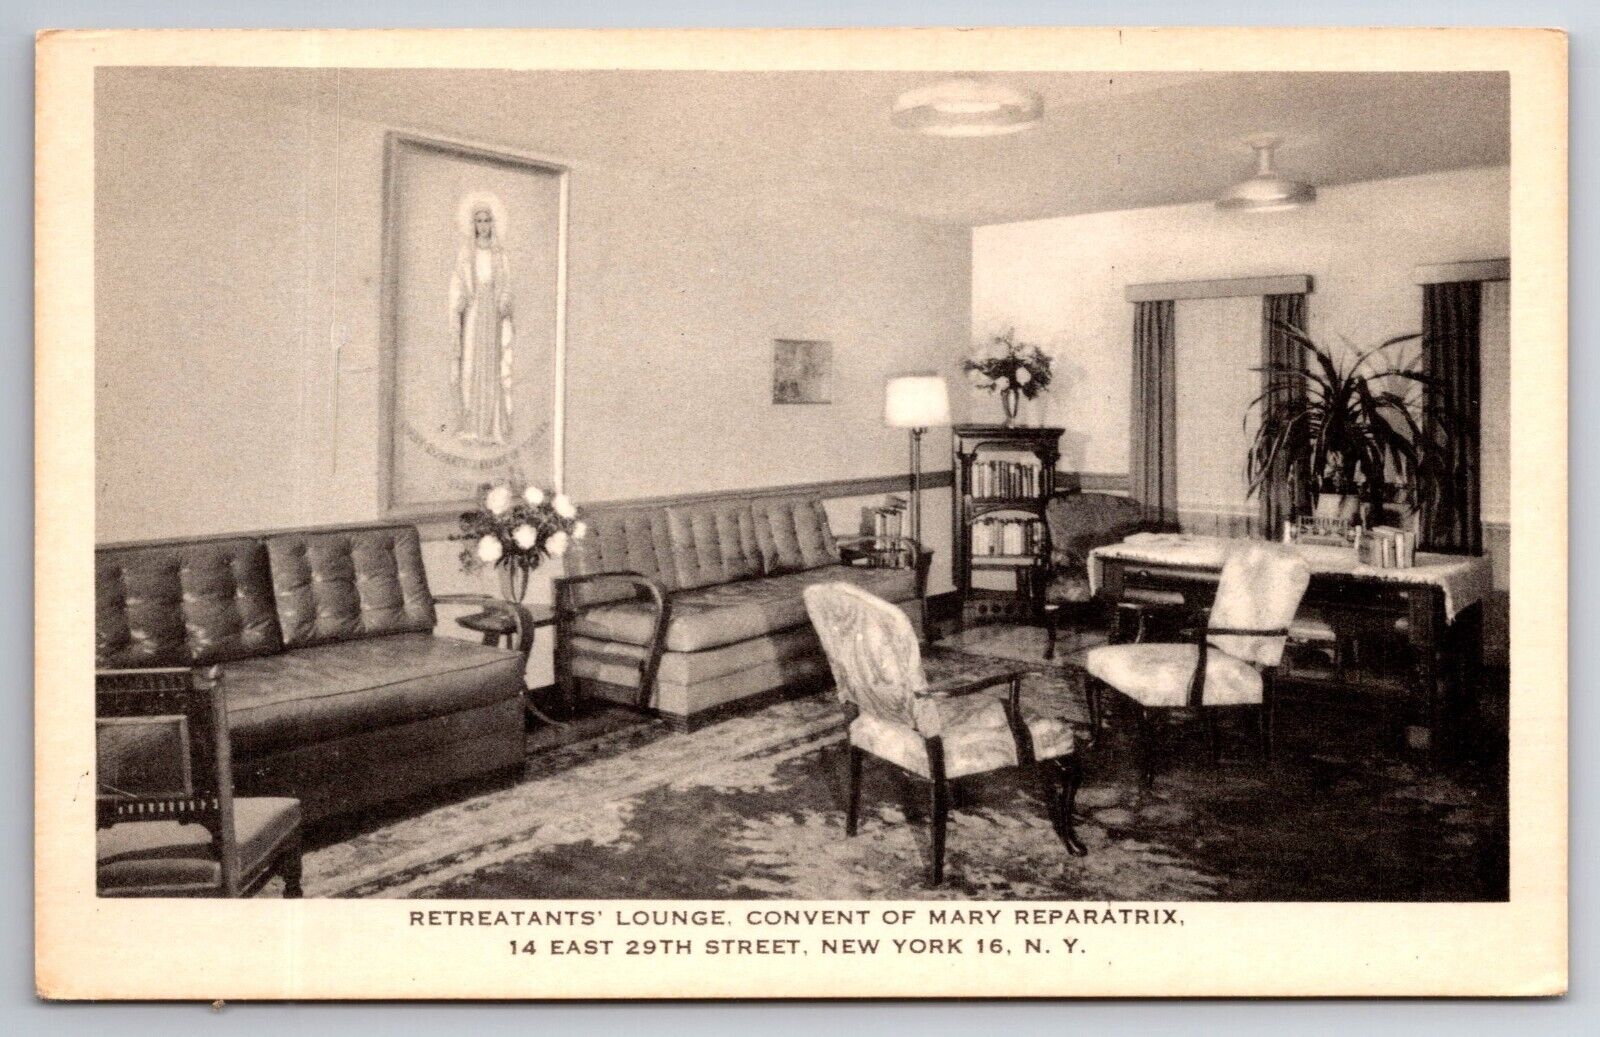 RETREATANTS\' LOUNGE, CONVENT OF MARY REPARATRIX, 14 EAST 29TH STREET, NEW YORK